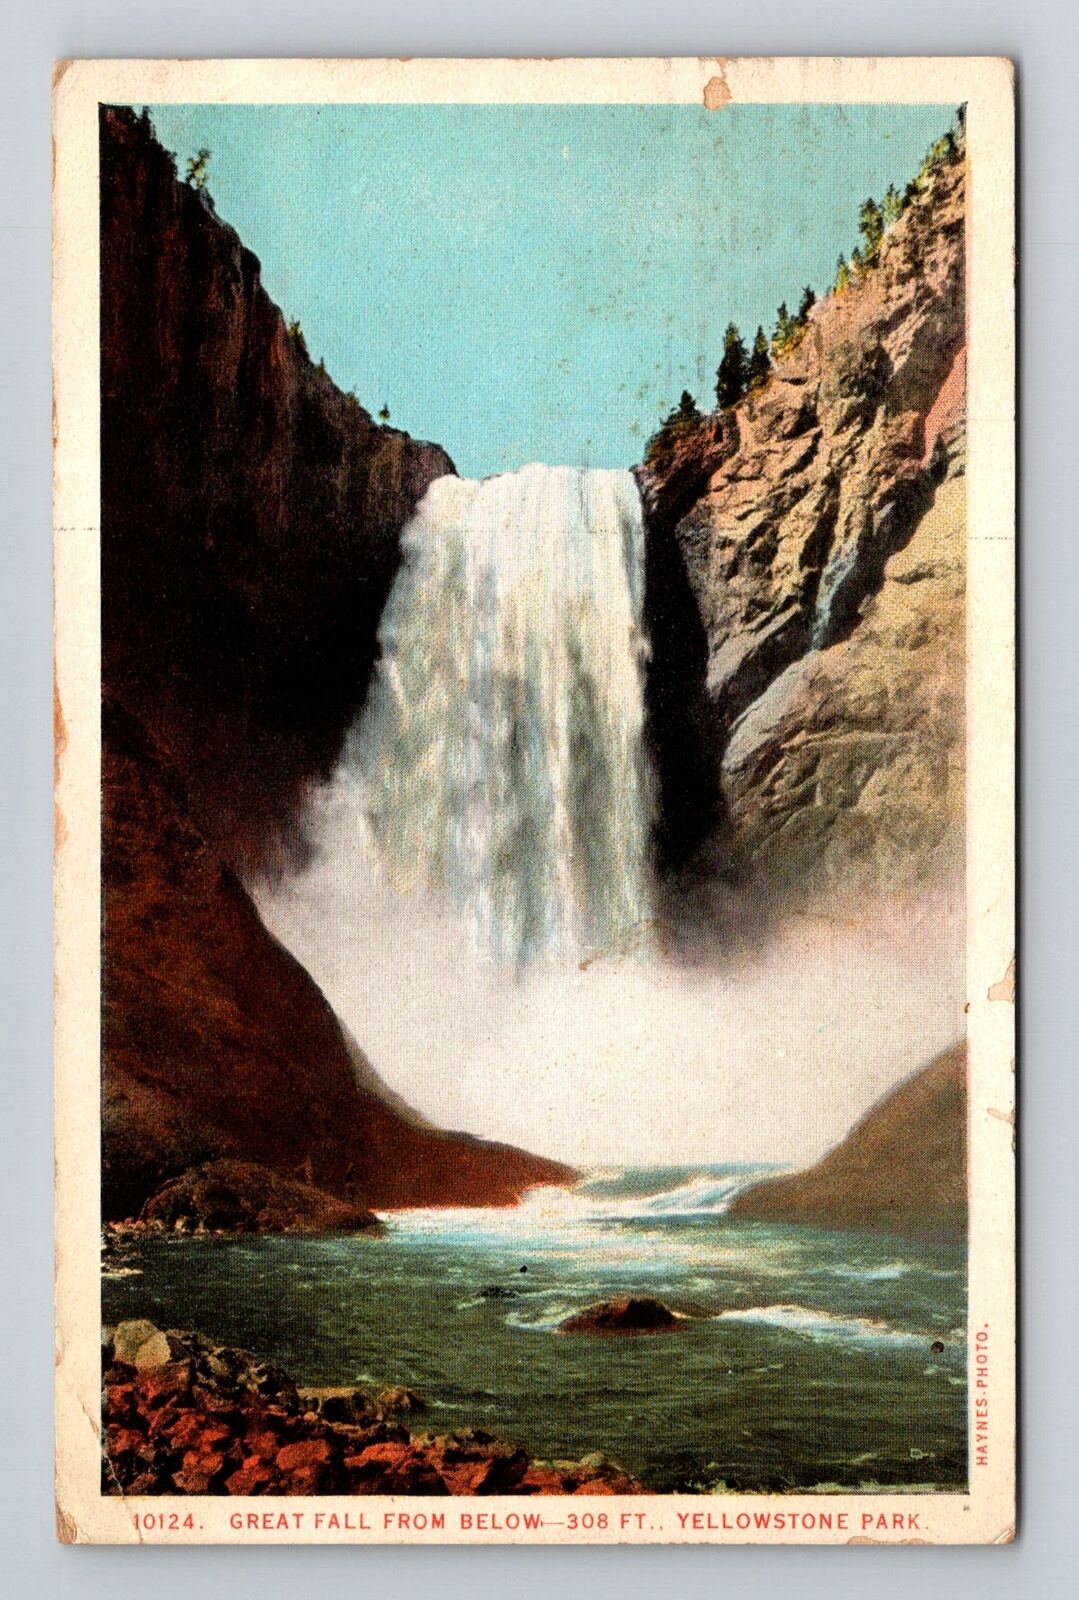 Yellowstone National Park, Great Fall, Series #10124 Vintage c1924 Postcard